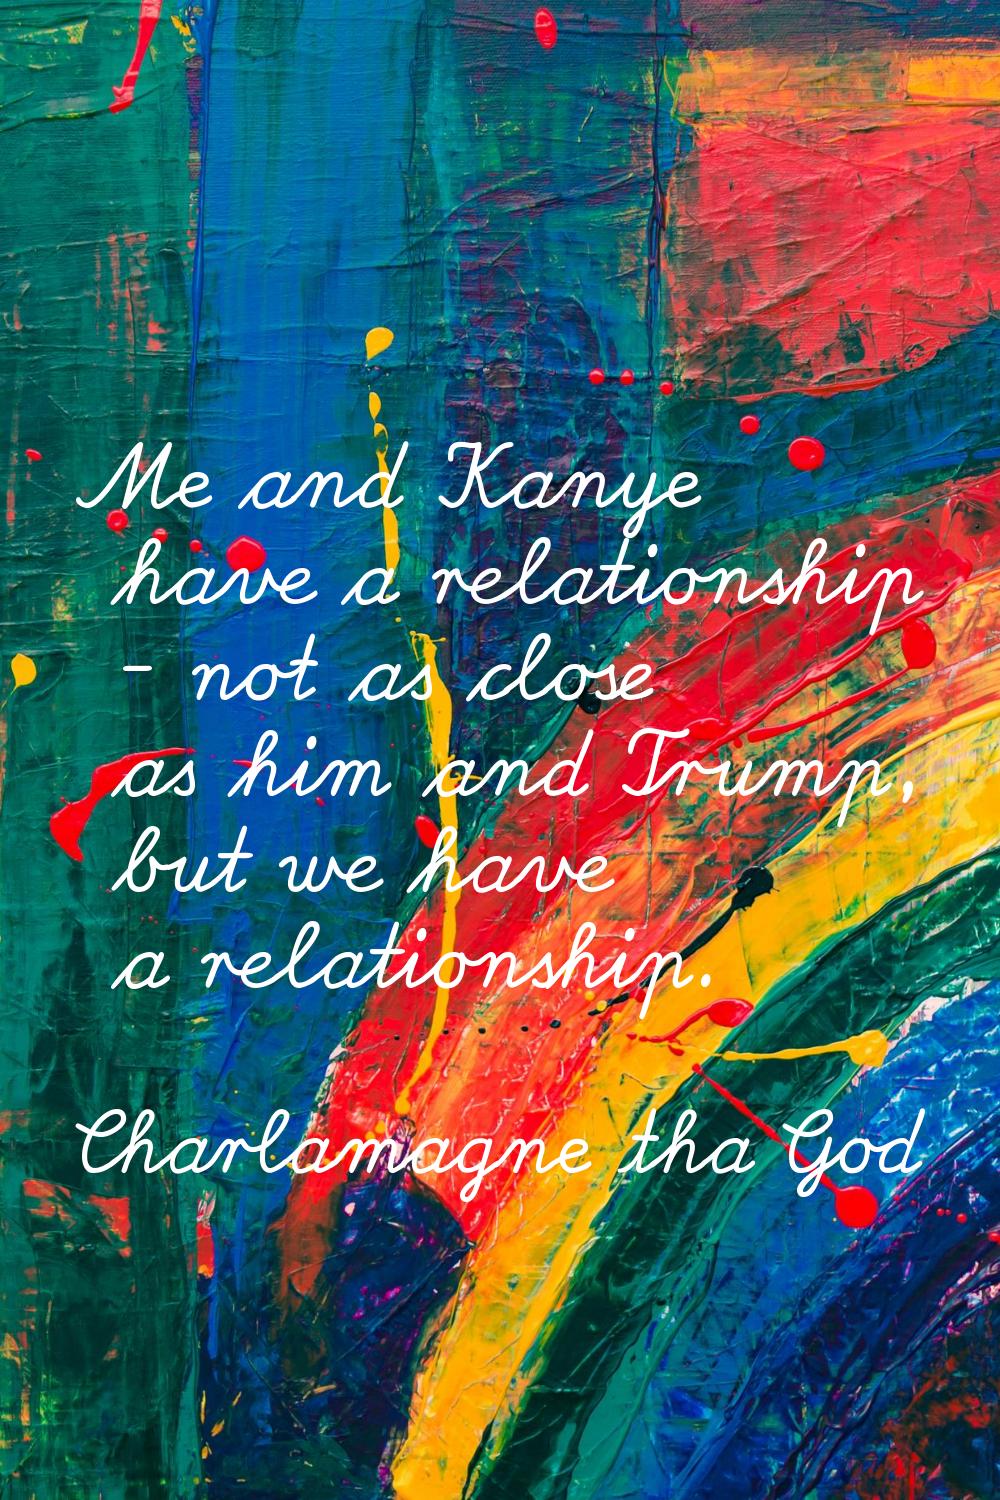 Me and Kanye have a relationship - not as close as him and Trump, but we have a relationship.